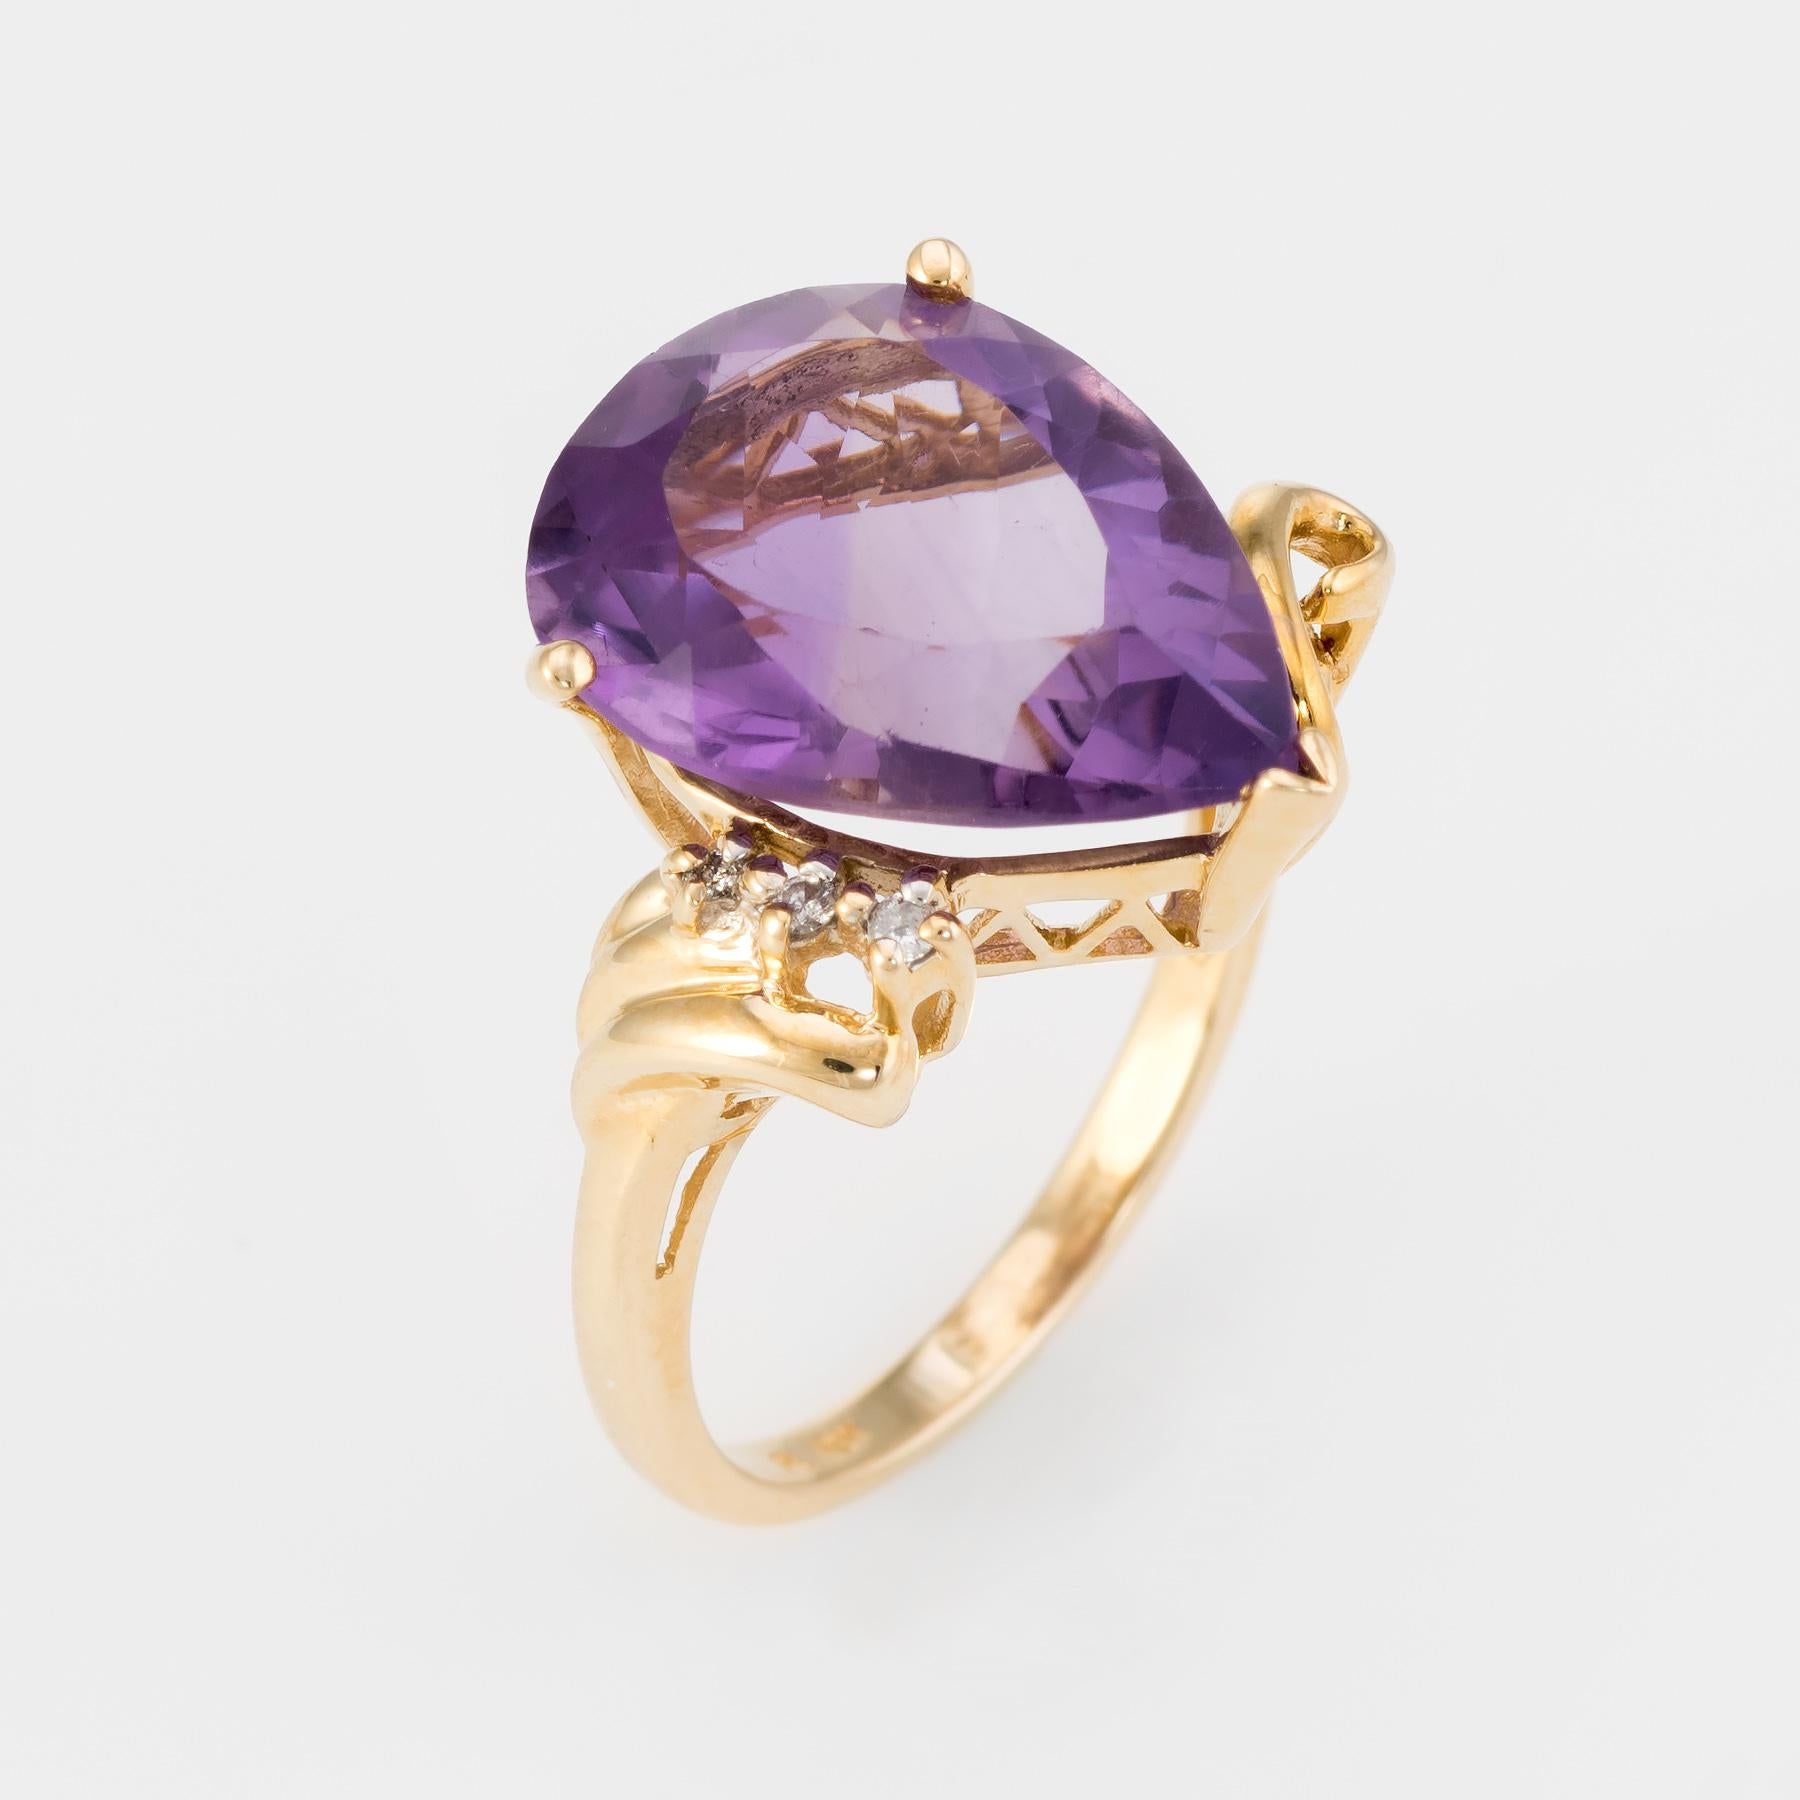 Finely detailed vintage amethyst & diamond cocktail ring, crafted in 10 karat yellow gold. 

Centrally mounted pearl cut amethyst measures 15.5mm x 12mm (estimated at 7.50 carats), accented with three diamonds (estimated at 0.02 carats - I-J color